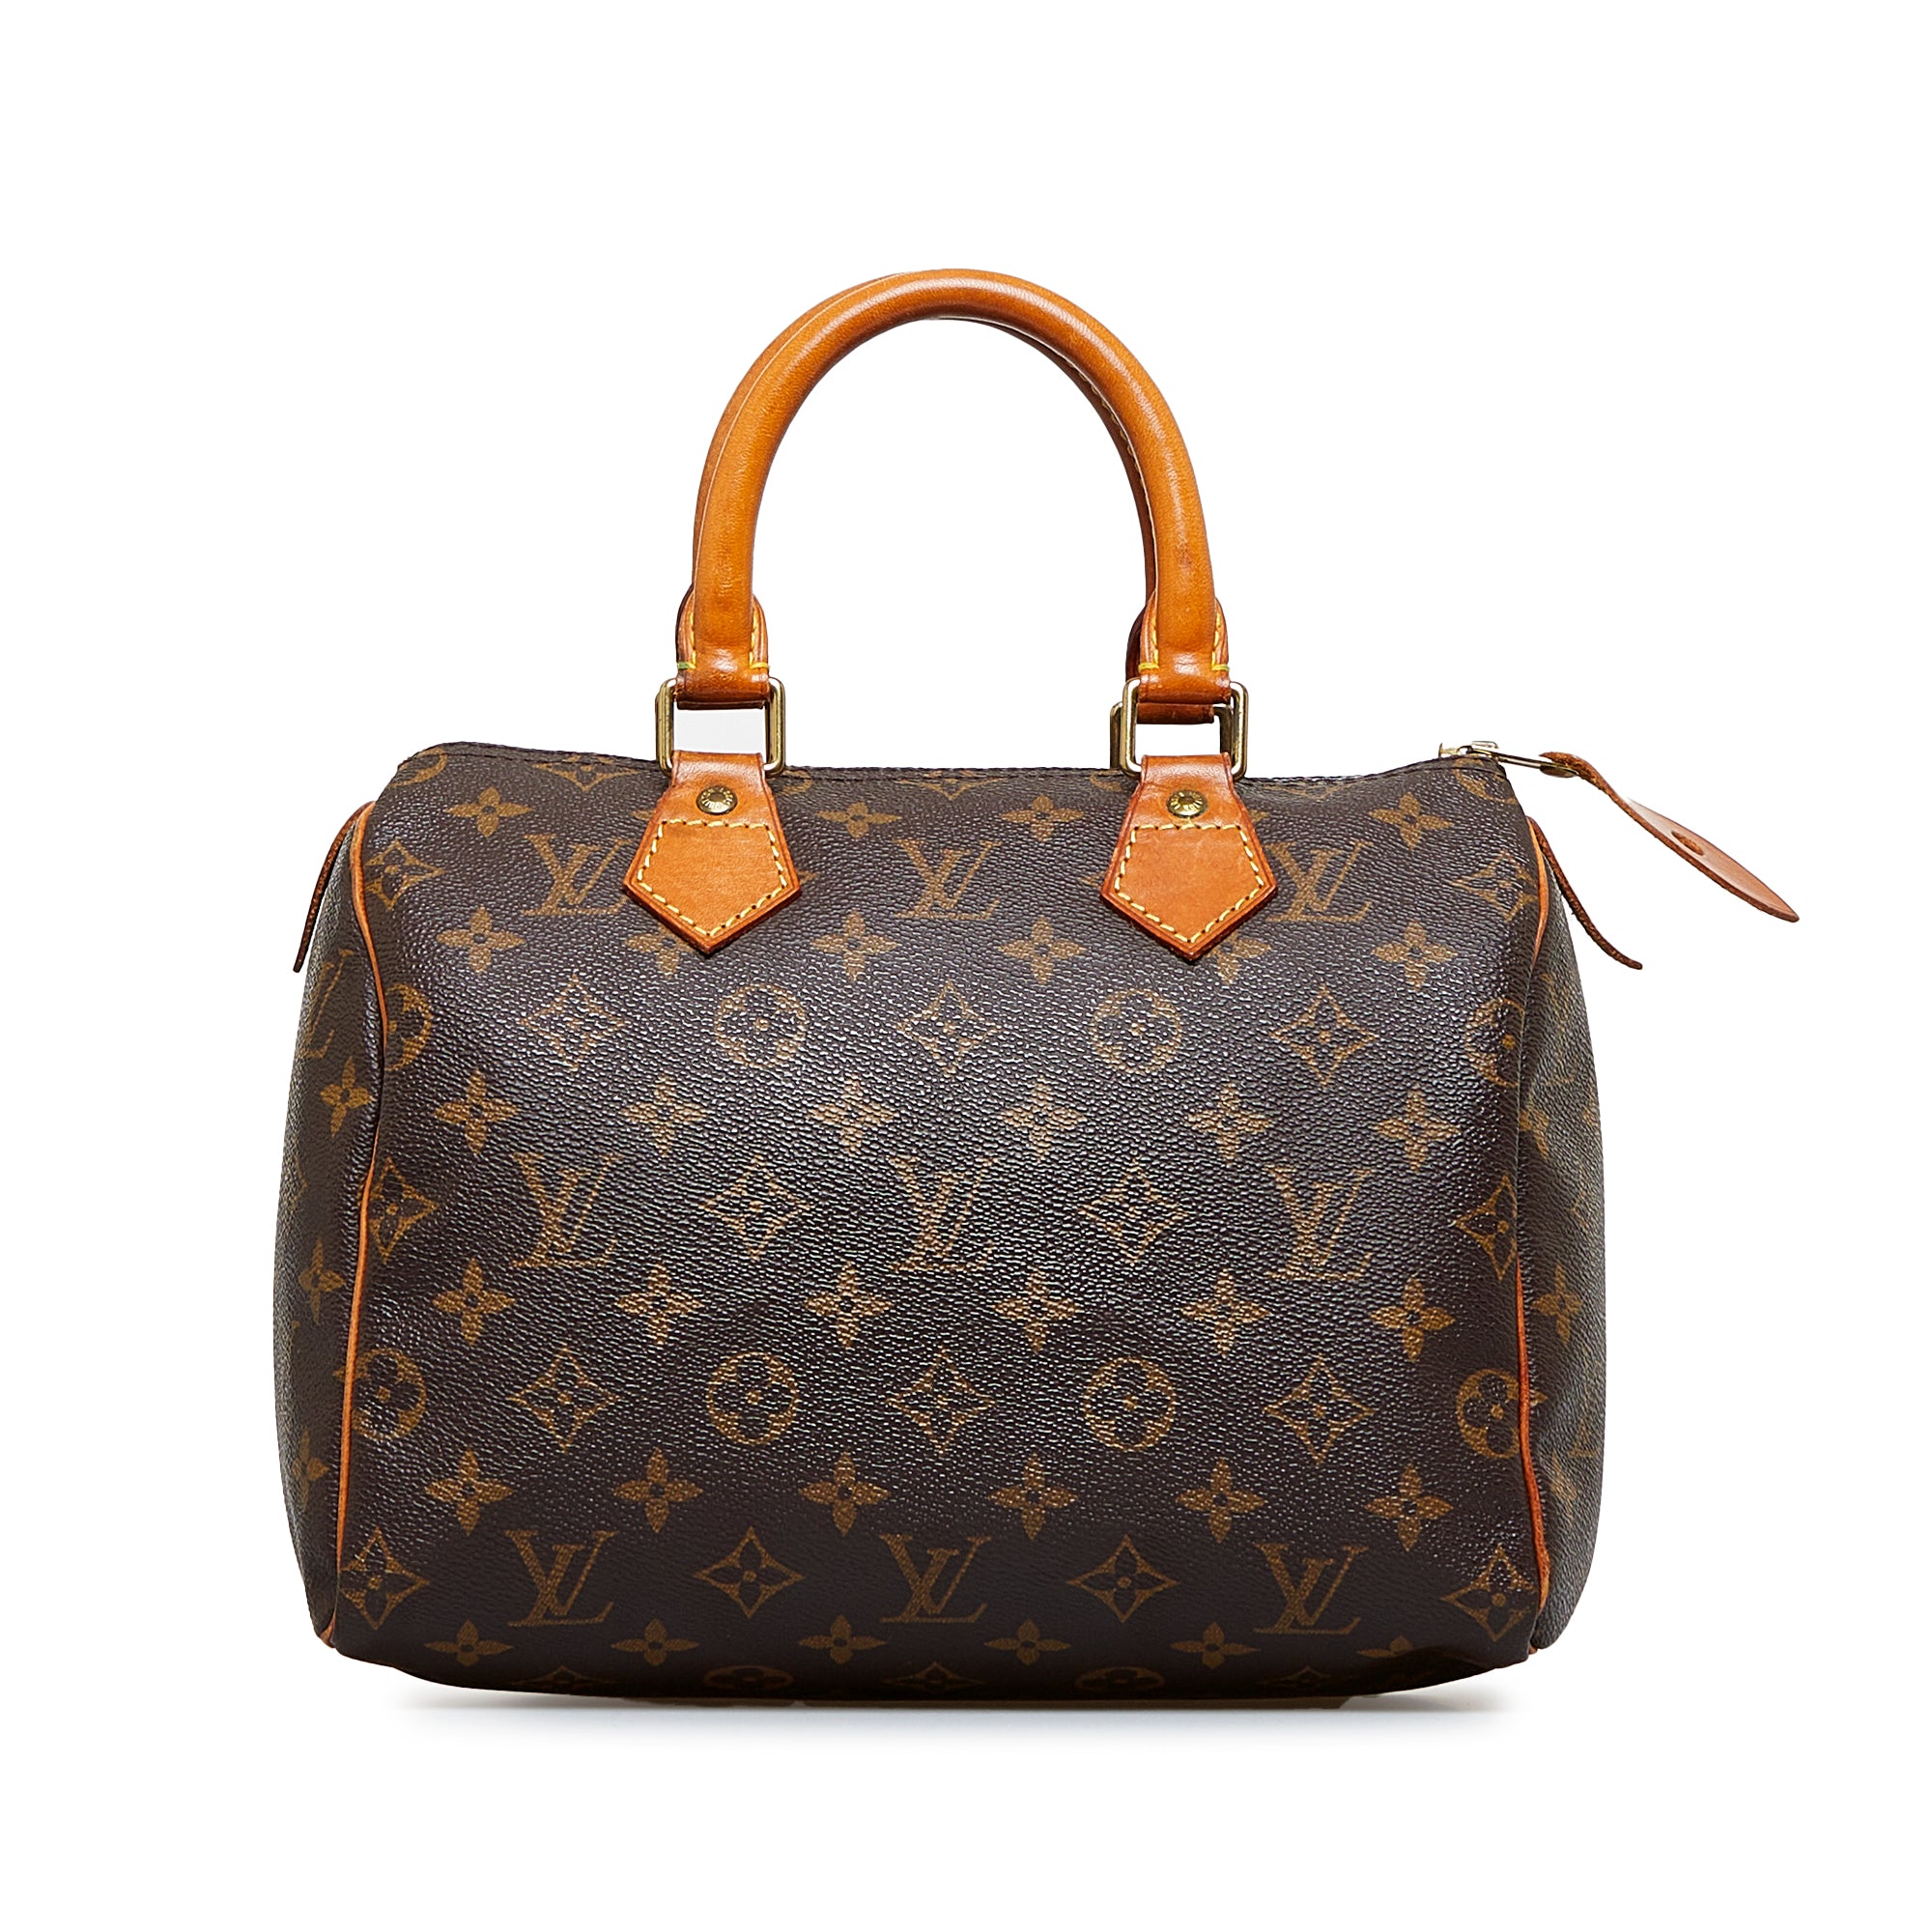 LOUIS VUITTON MINI BACKPACK PURSE - clothing & accessories - by owner -  apparel sale - craigslist